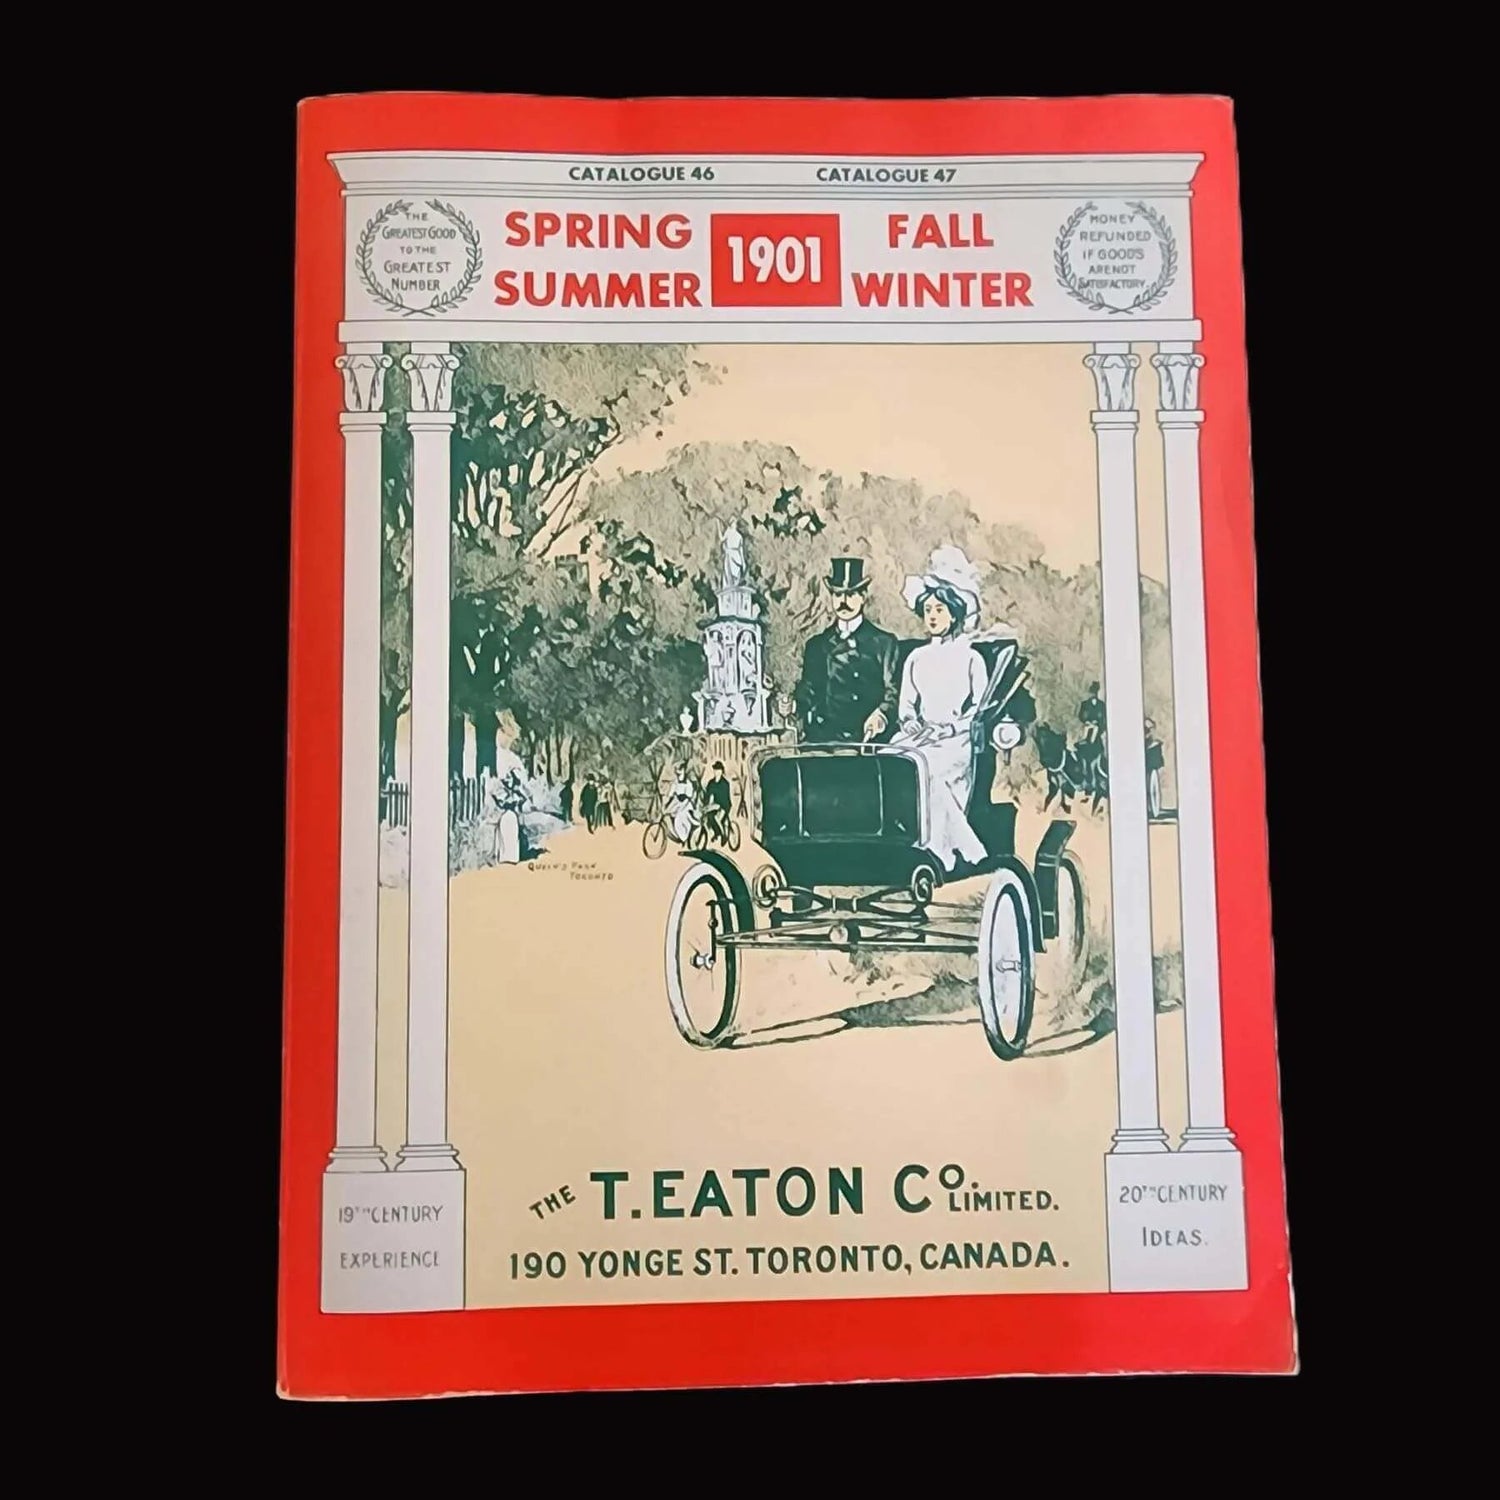 An old paperback catalogue from Eatons